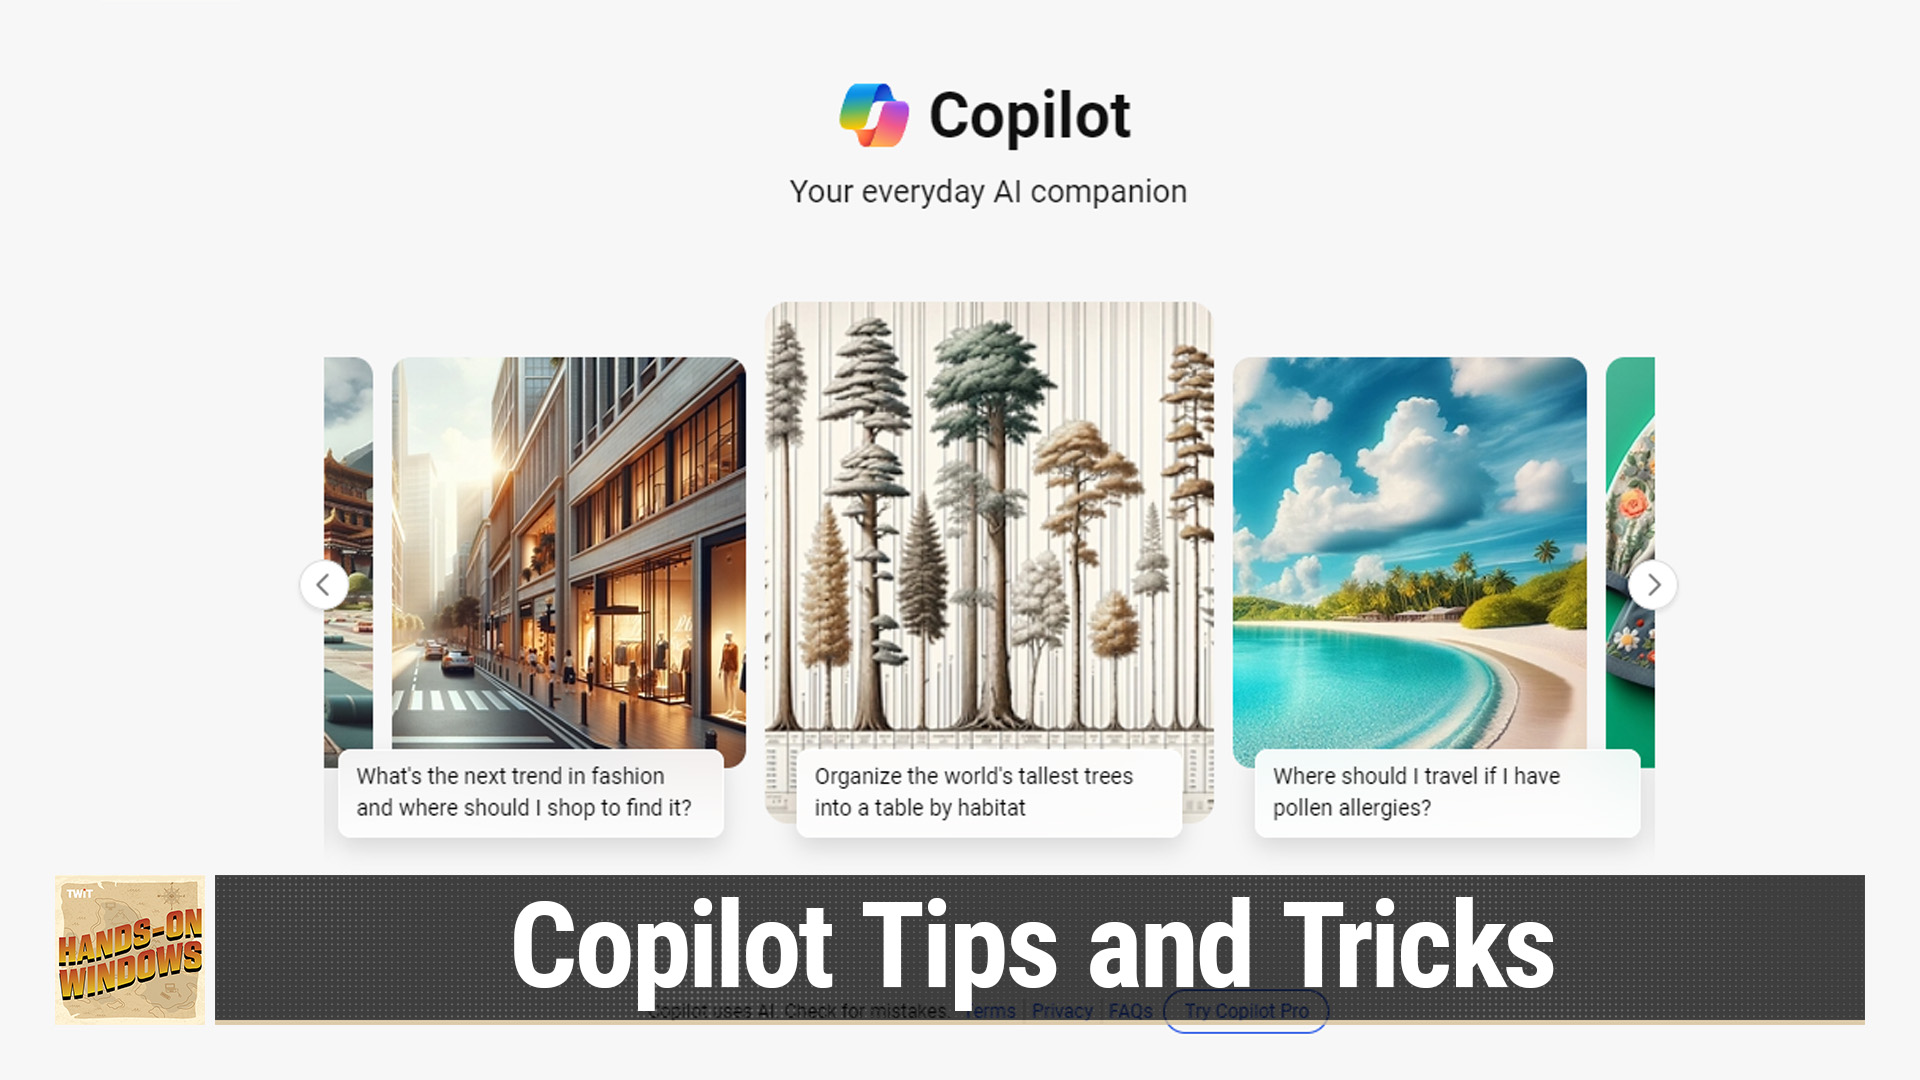 Copilot Tips and Tricks (Hands-On Windows #89)